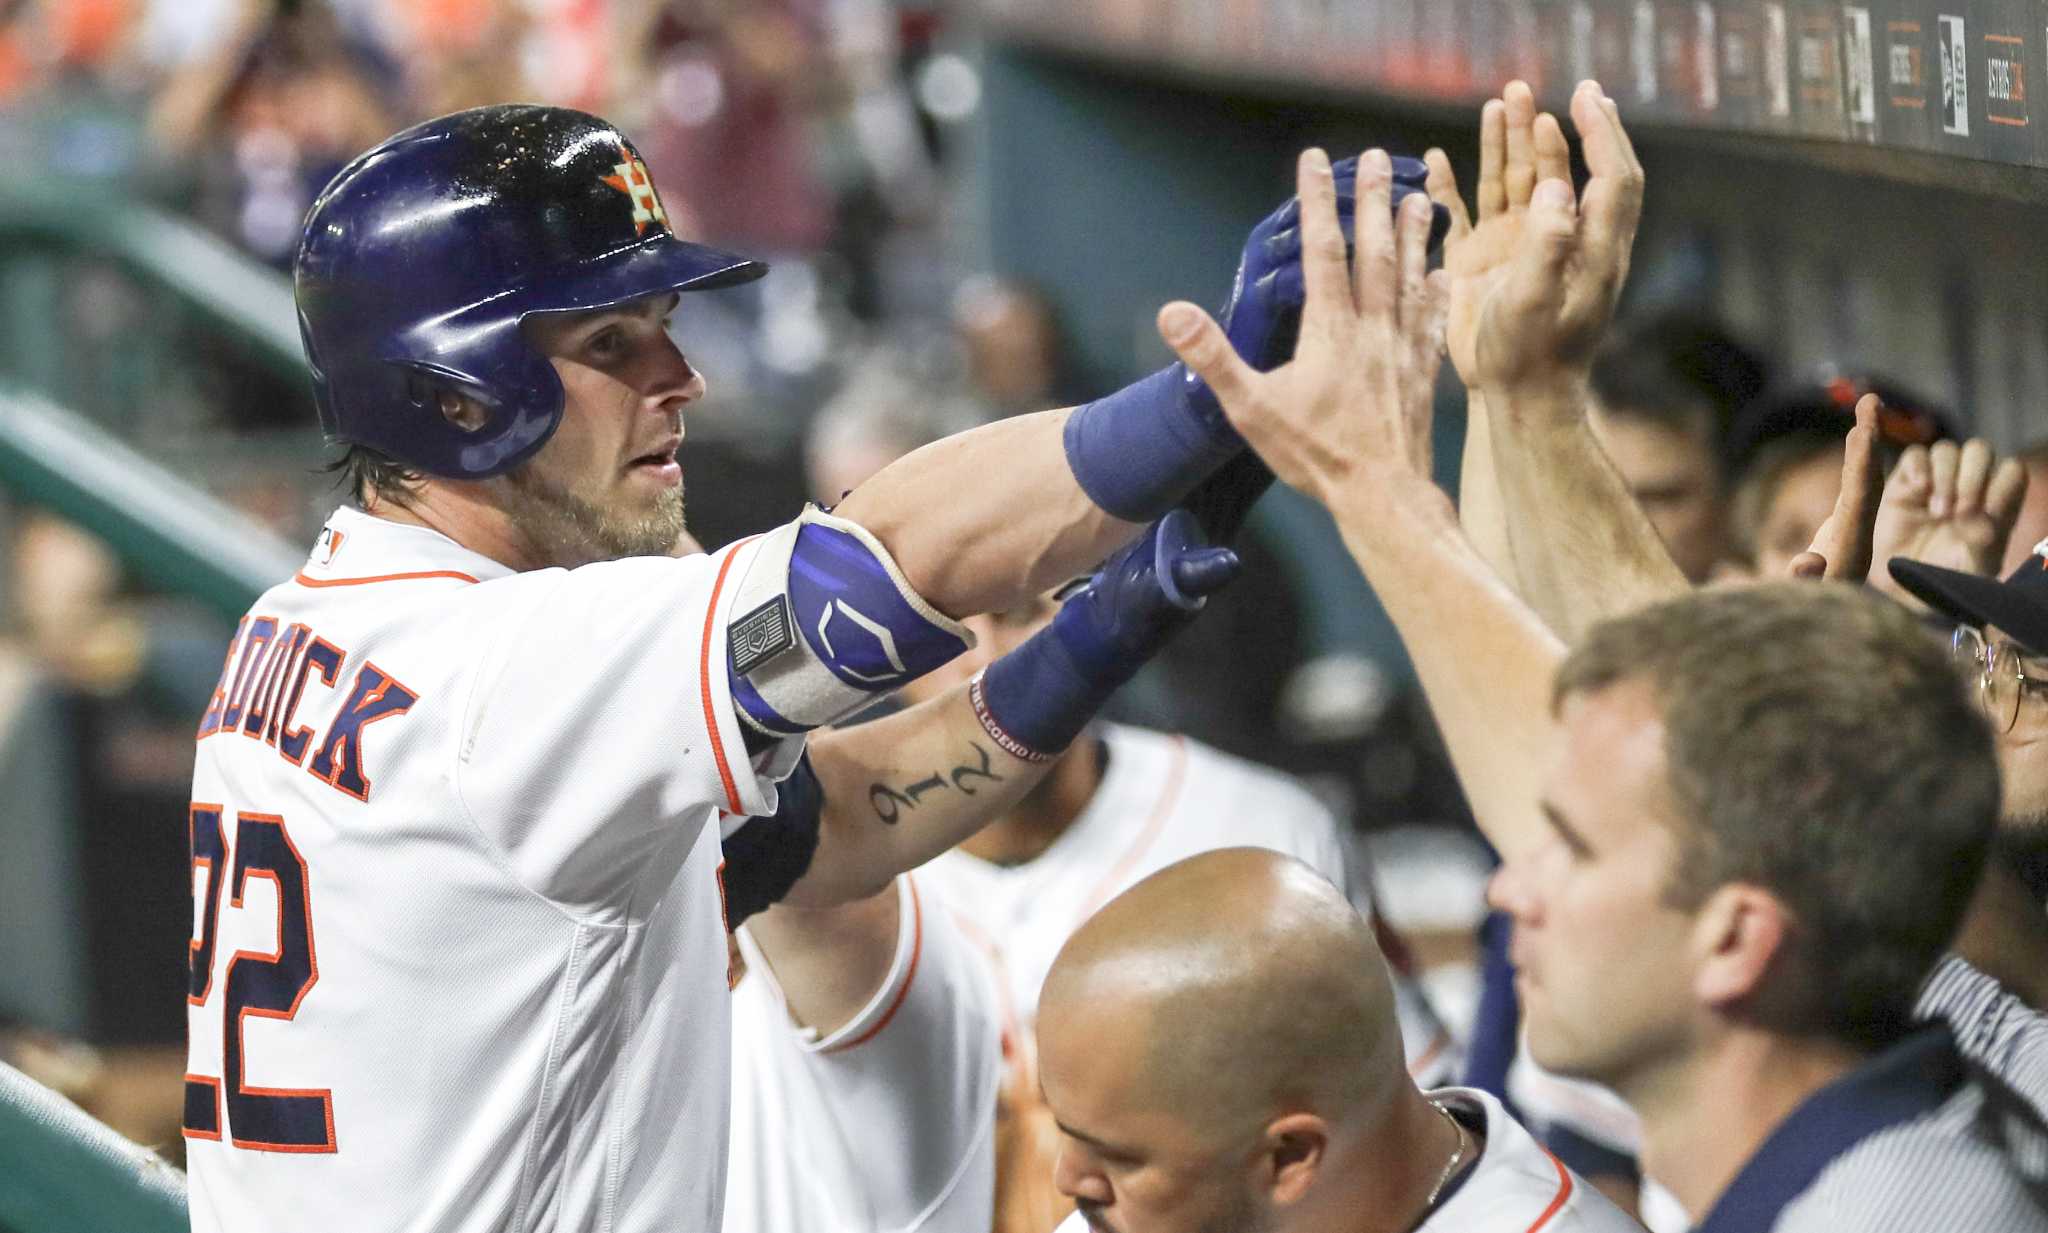 Old Man Giver: Bartolo Colon lit up as Astros top Braves 8-3